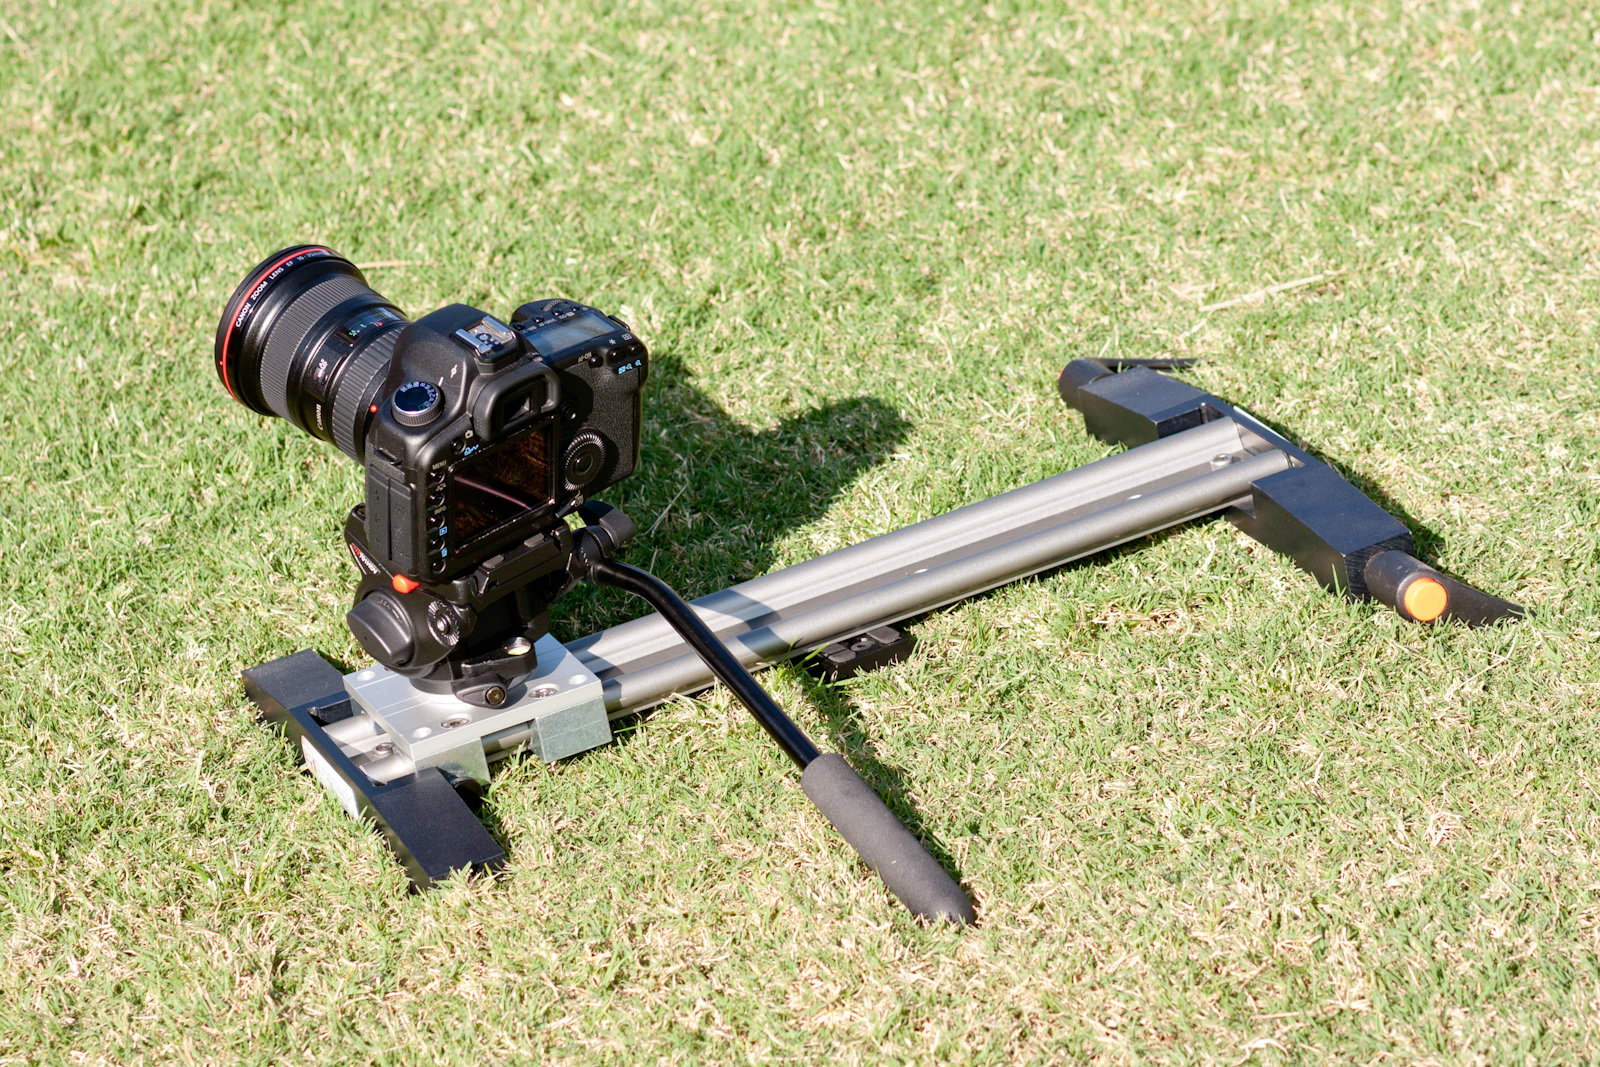 the camera is attached to an object in a field